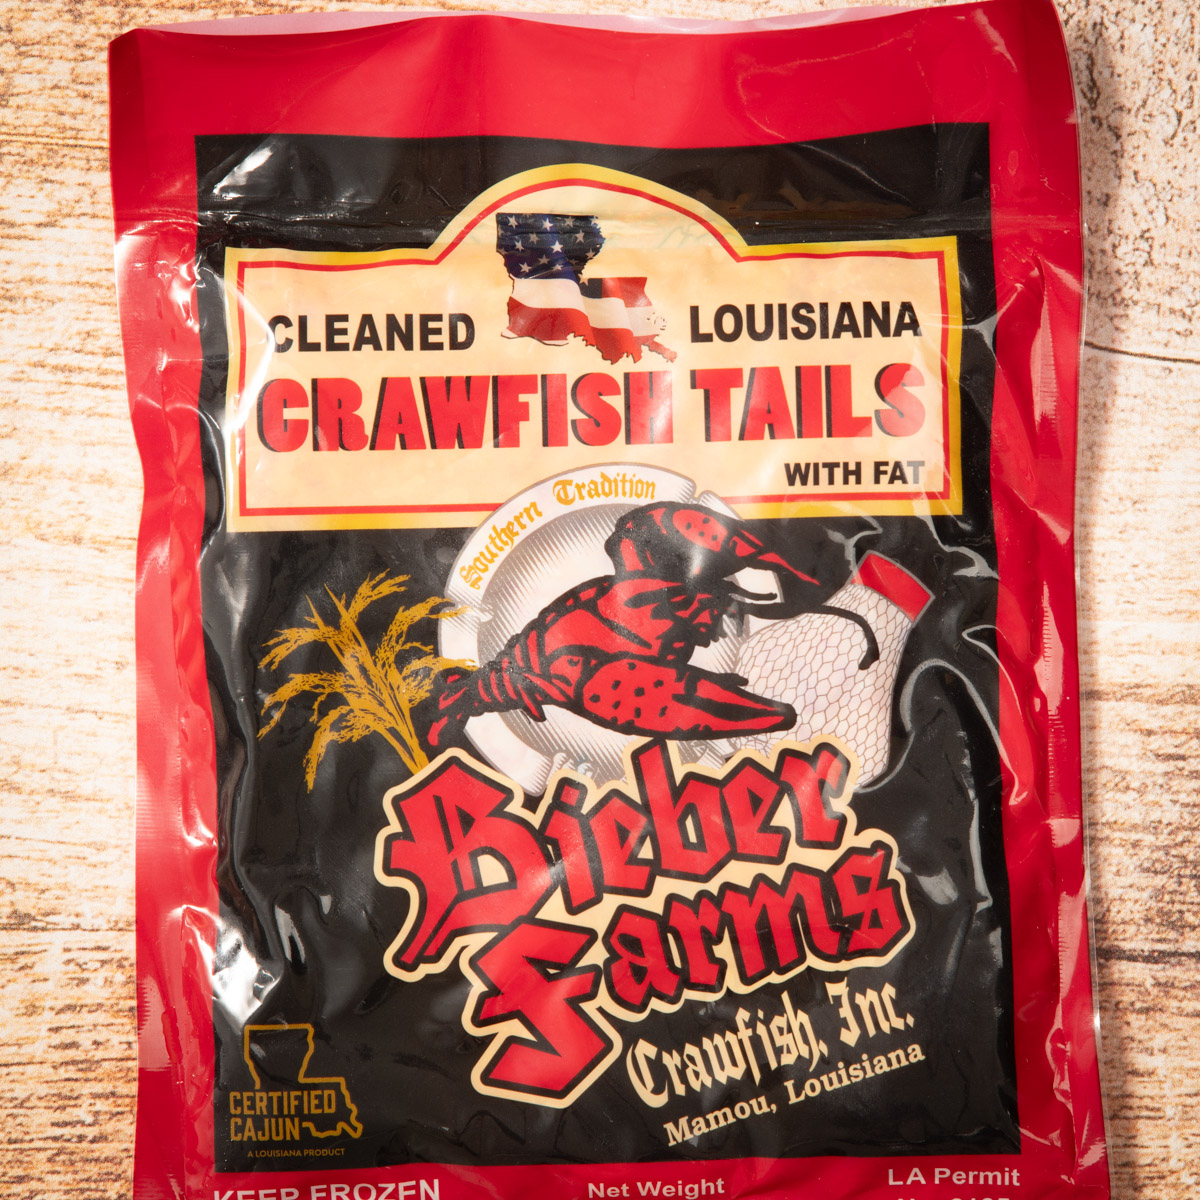 Package of crawfish tail meat.